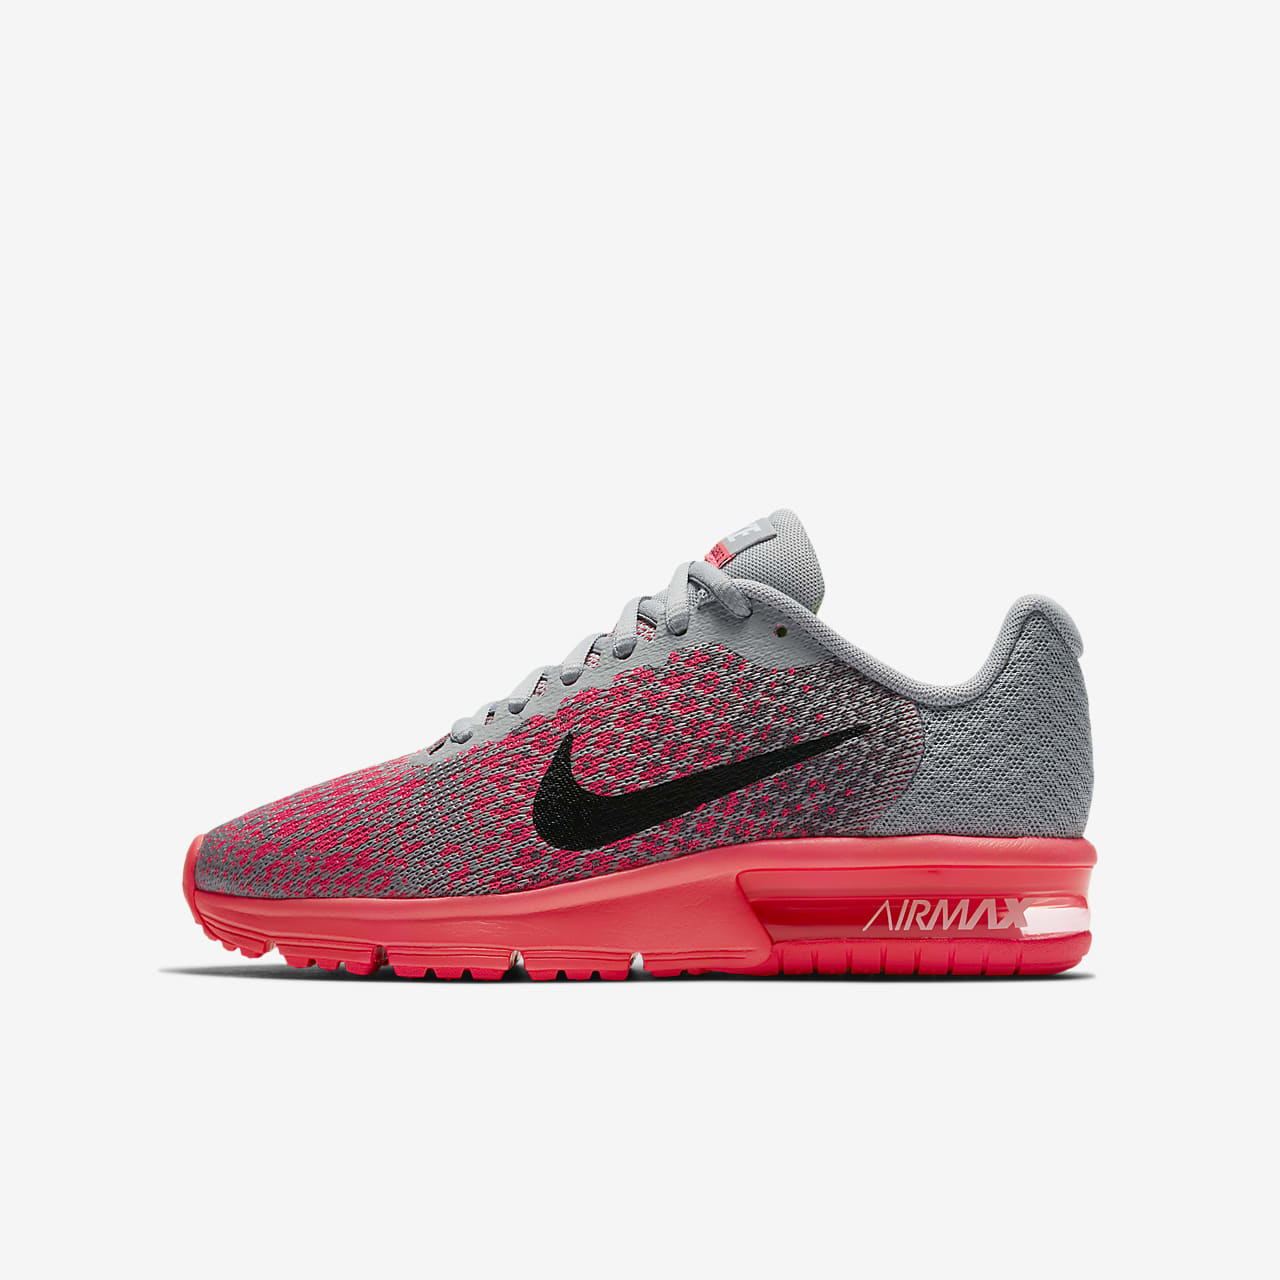 Nike Air Max Sequent 2 Older Kids' Running Shoe